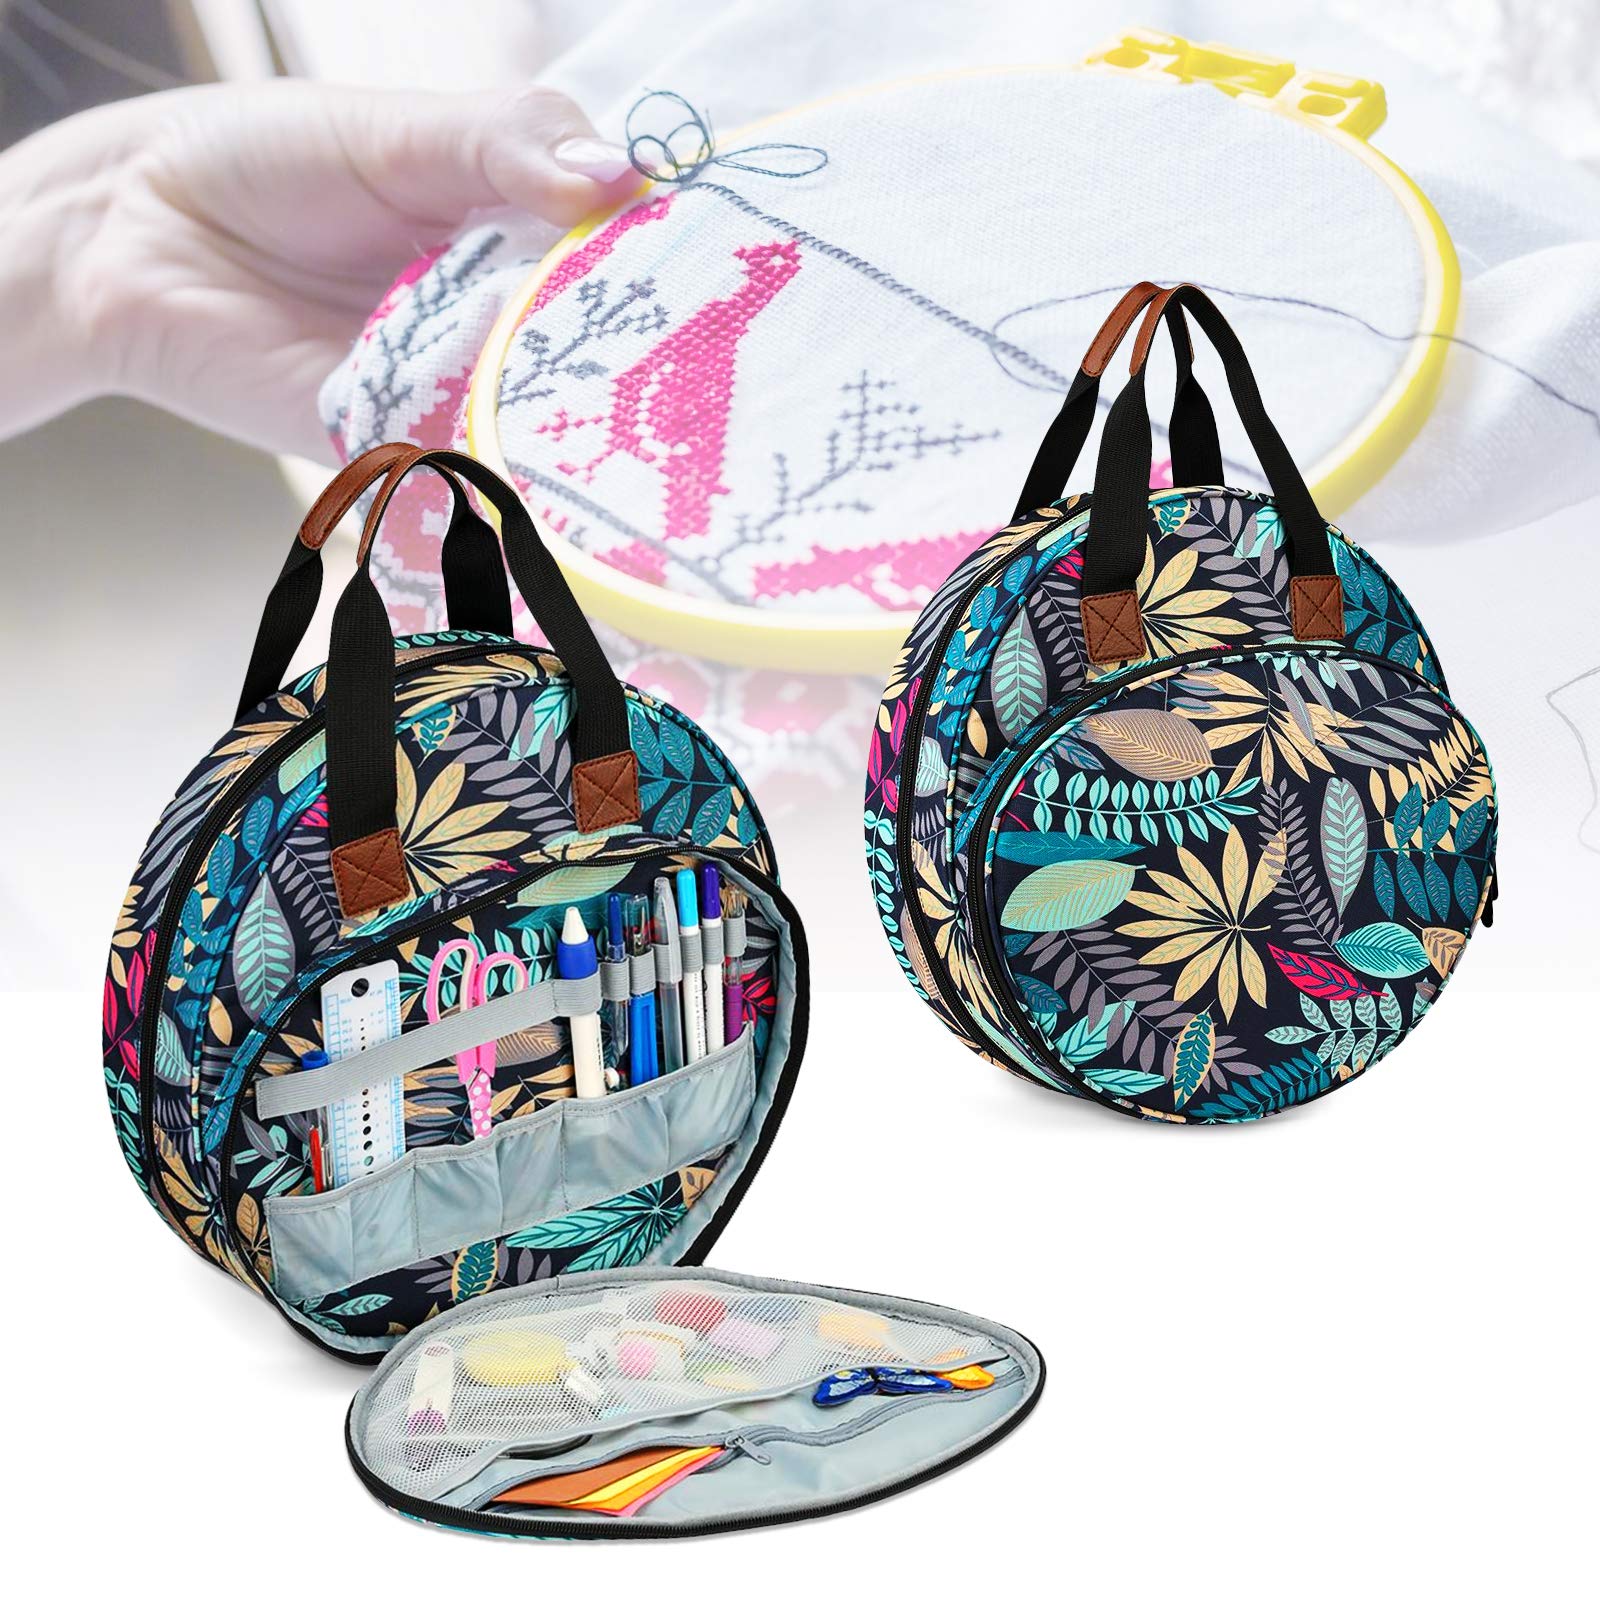 Embroideries Bags Embroidery Storage Embroidery Project Bag 600D Oxford Bag  for Cross Stitch Embroidery Supplies Multifunctional Portable Carrying Bag  Beginner Embroidery Kit for Adults (Bag ONLY)